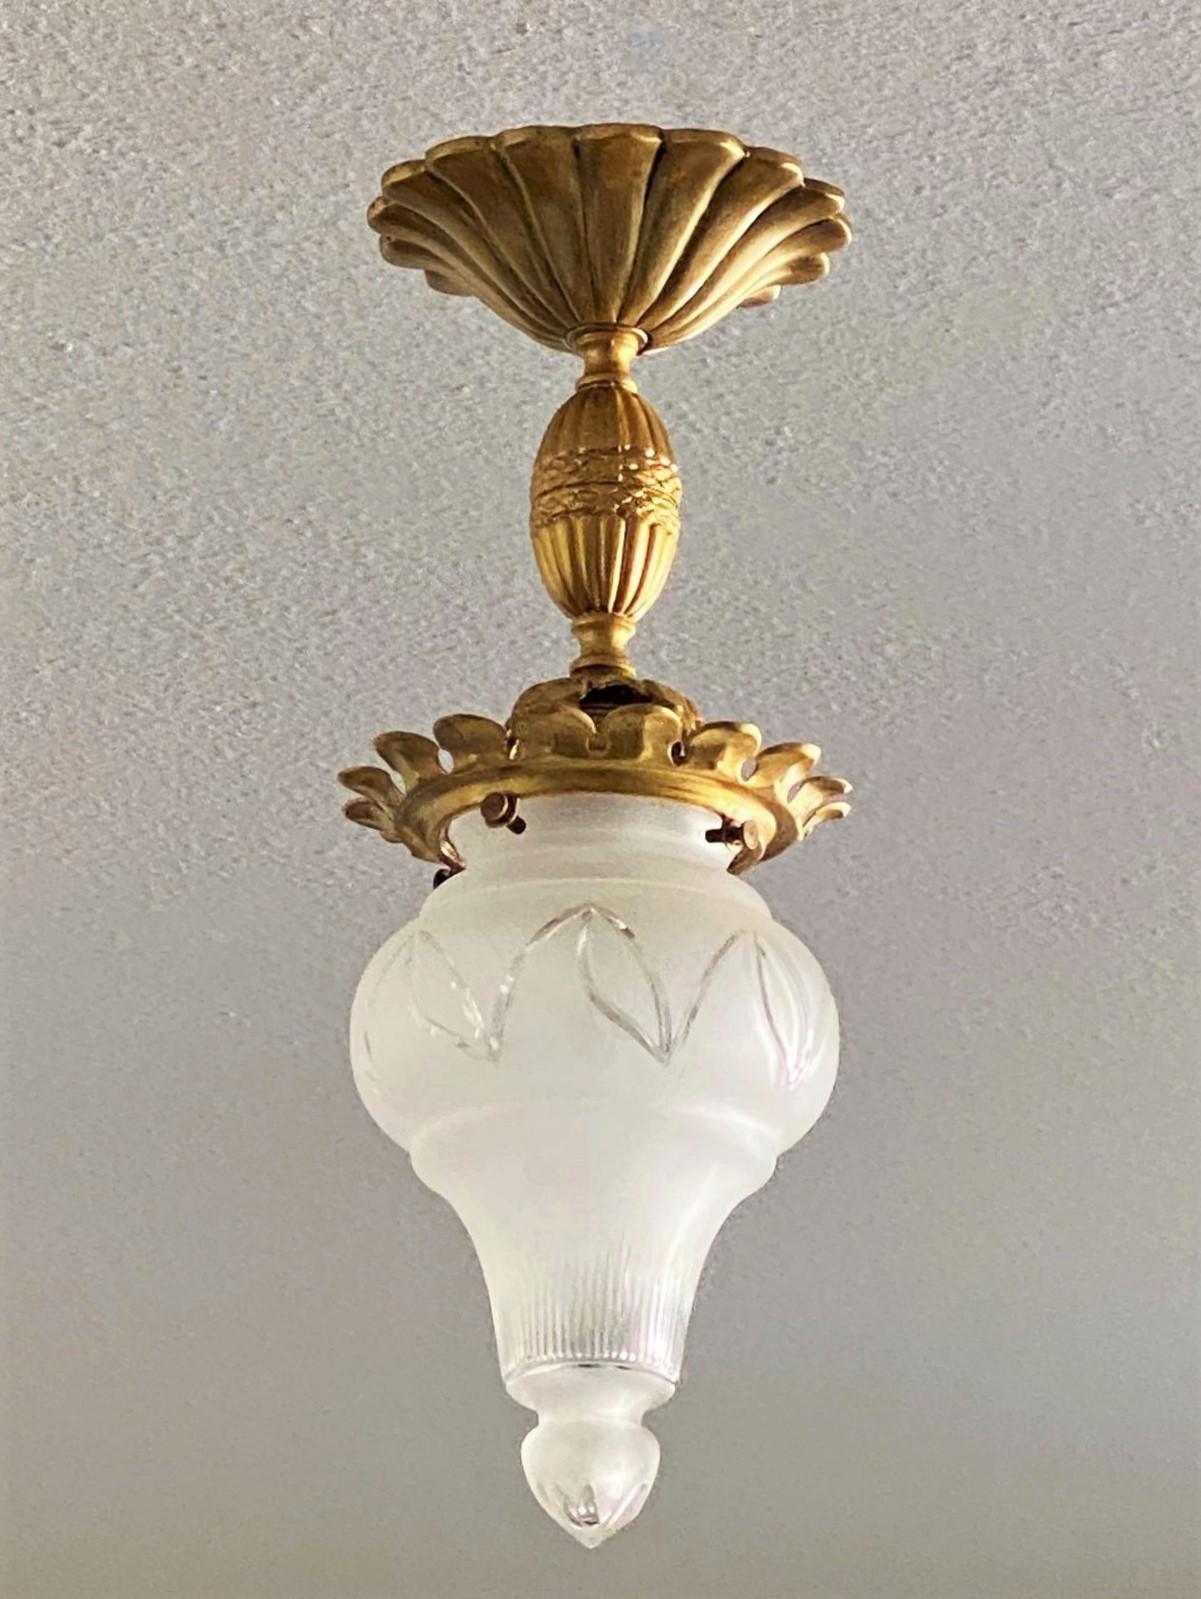 A lovely cut glass and gilt bronze flush mount/ceiling France, 1930s. This beautiful piece is very good condition, aged patina to gilt bronze, no chips or cracks, rewired.
One brass and porcelain E27 light socke for a large sized E27 screw bulb.